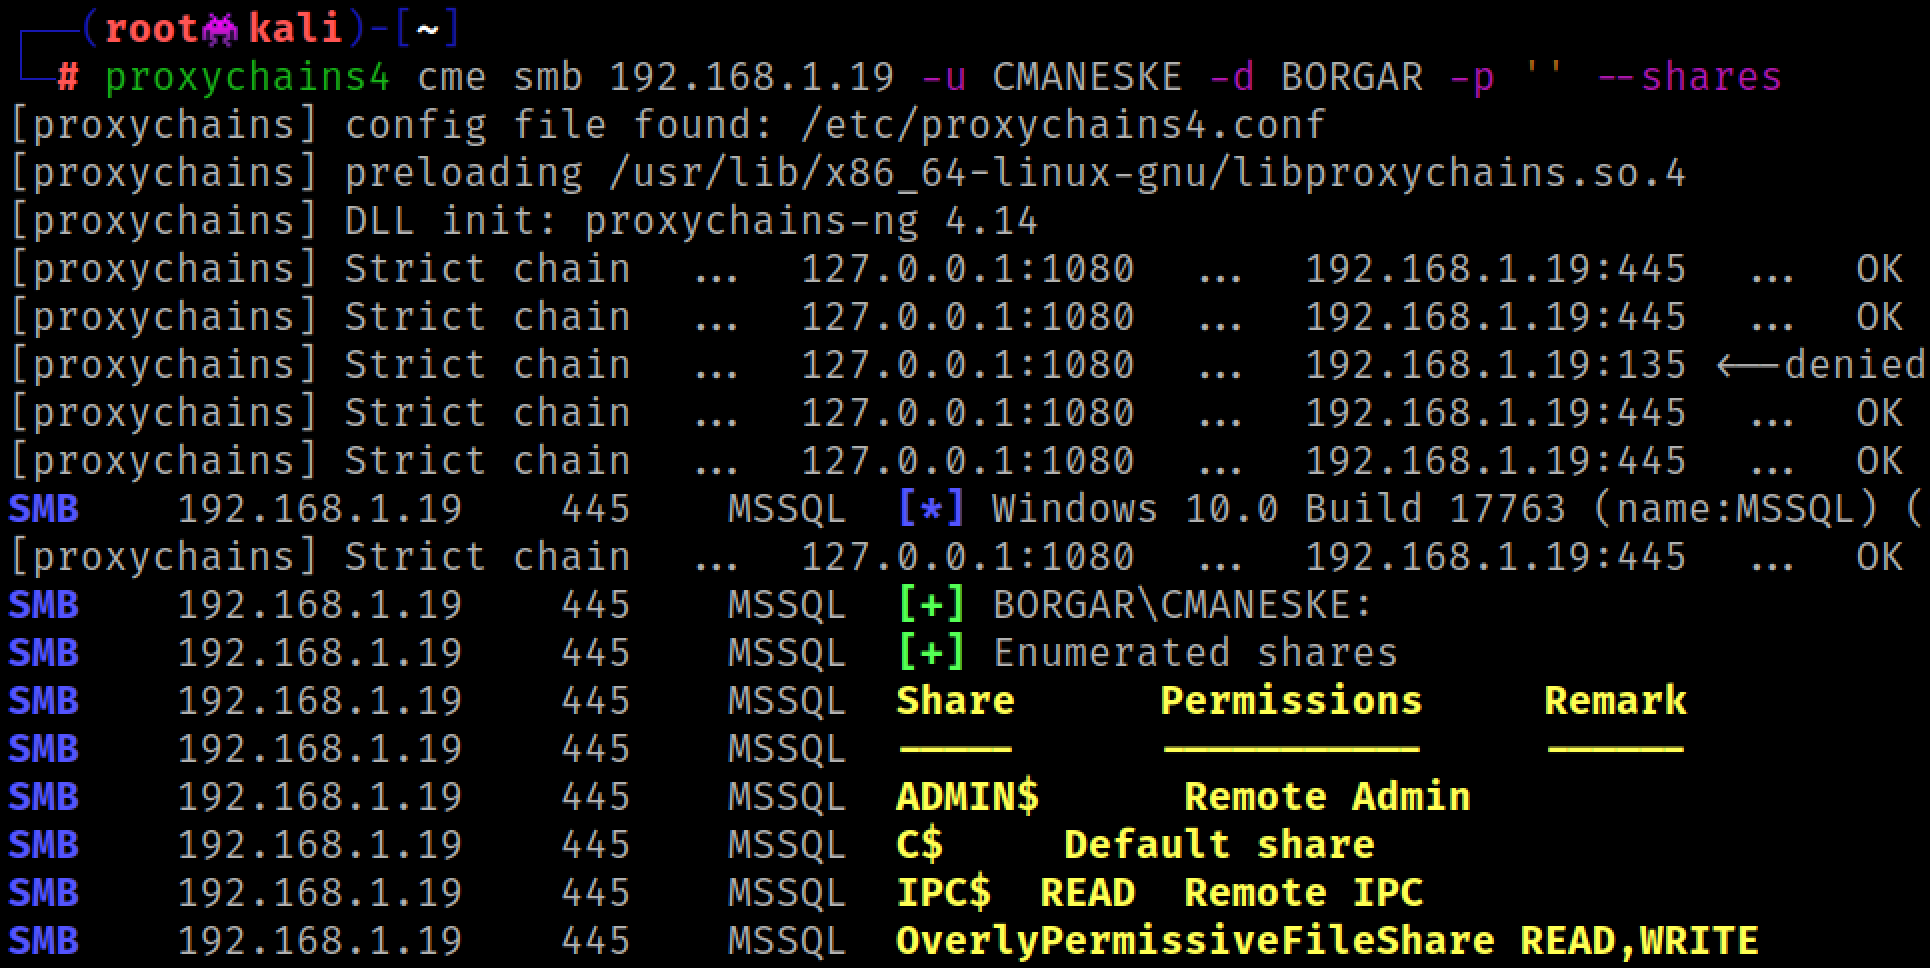 Using CrackMapExec to view shares on the victim relay host with our unprivileged user